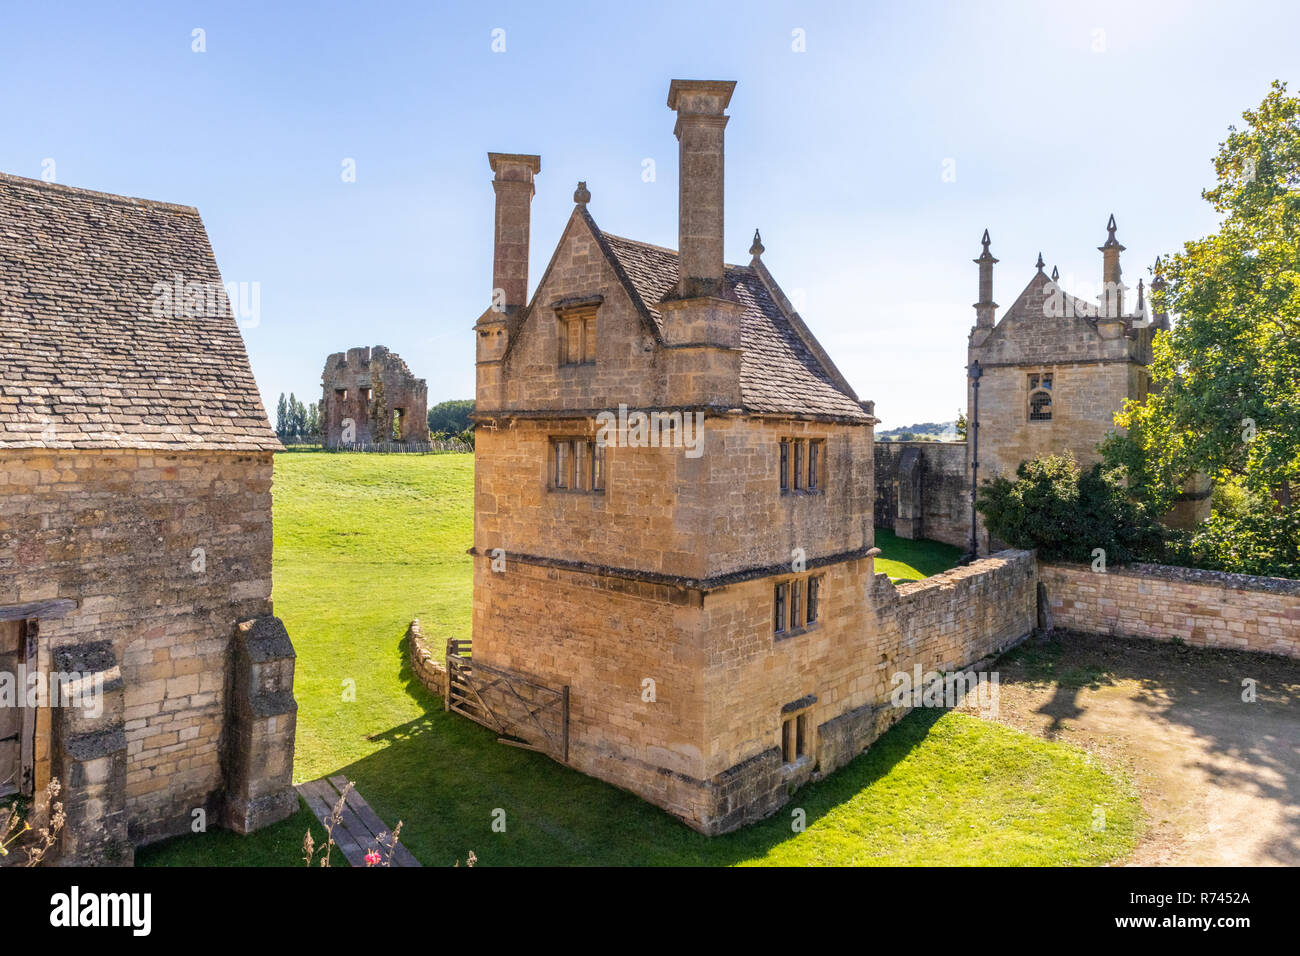 Some of the remaining buildings of Campden House built by Sir Baptist Hicks in 1613 in the Cotswold town of Chipping Campden, Gloucestershire UK Stock Photo